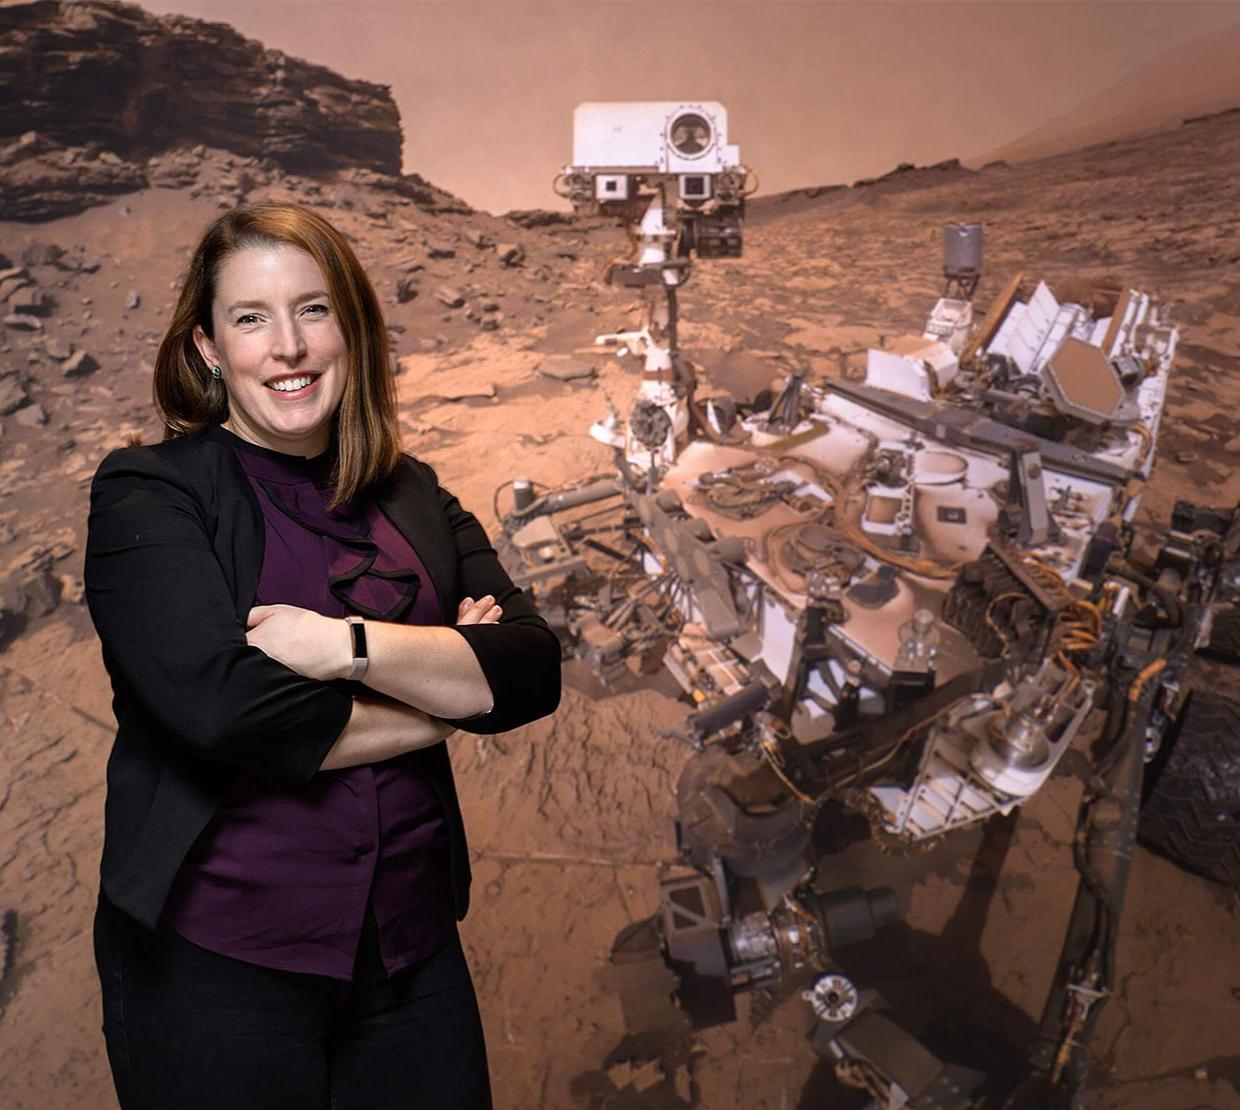 Planetary geologist and OSU alumna Briony Horgan in front of an image of the Perseverance rover.